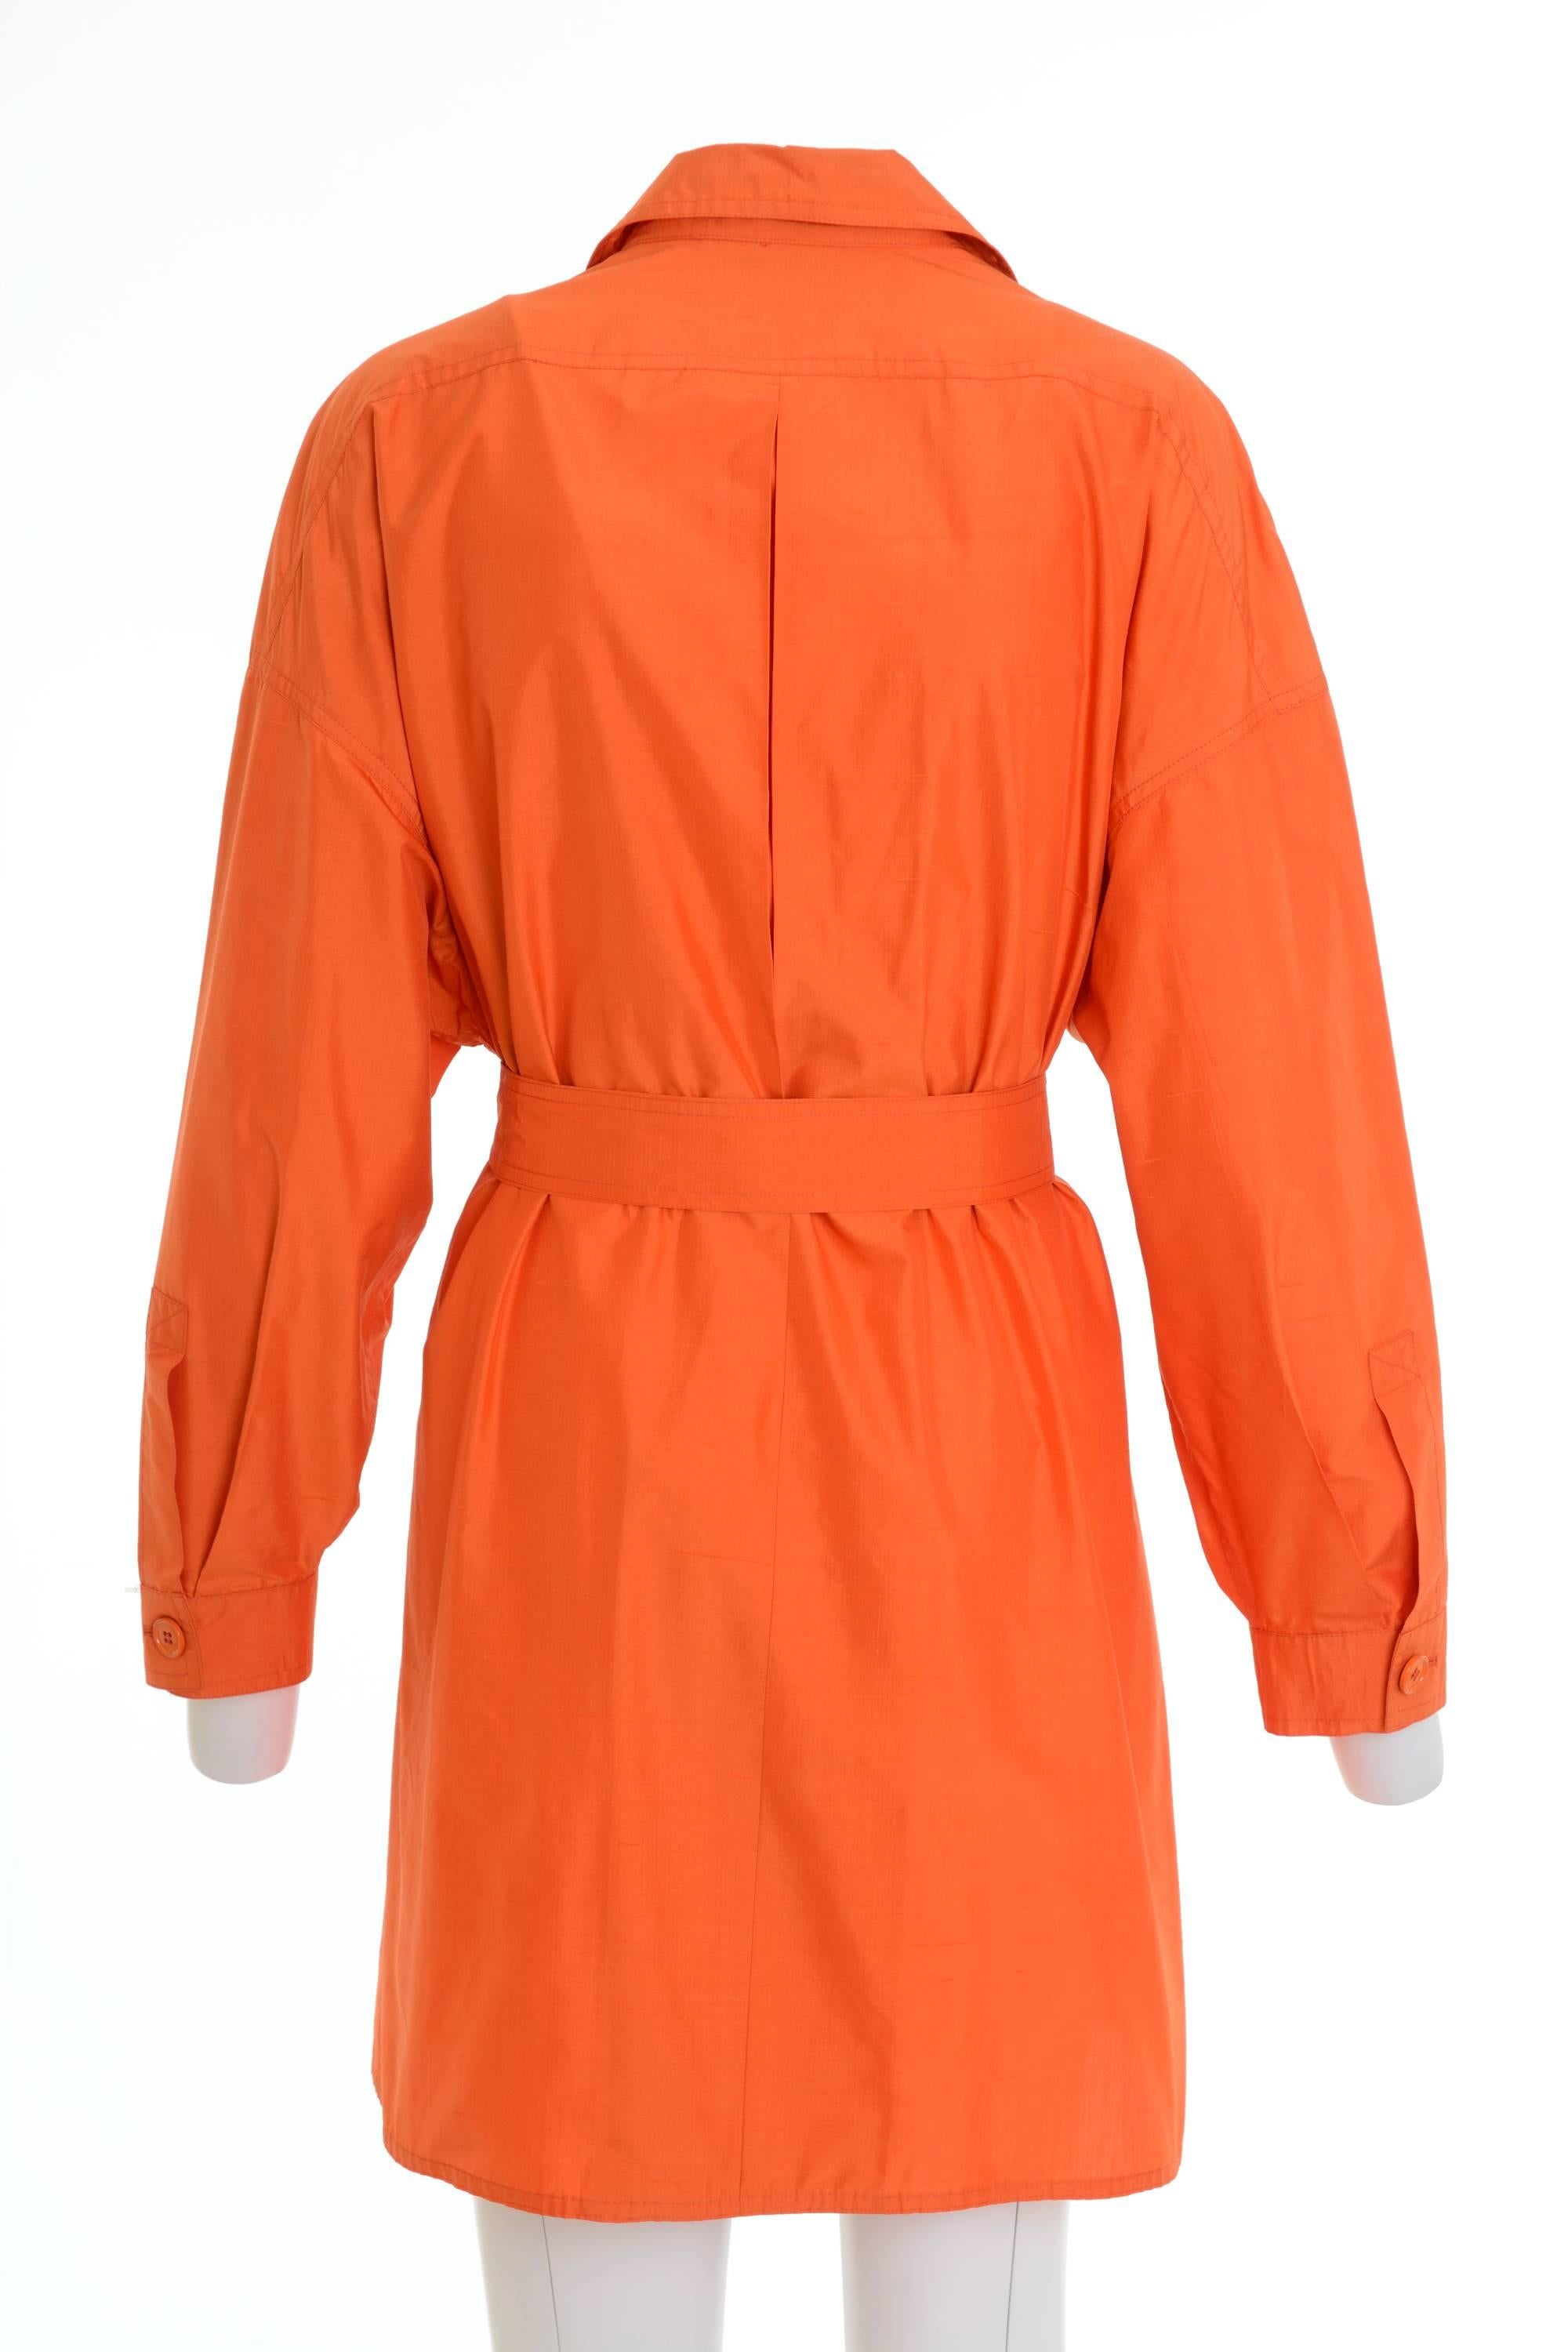 This amazing 1990s Gianfranco Ferrè oversize jacket is in orange silk fabric and has large frontal pleated , one button closure, belt included and large frontal pockets.

Excellent vintage condition

Label: Gianfranco Ferrè - Made in Italy  
Fabric: